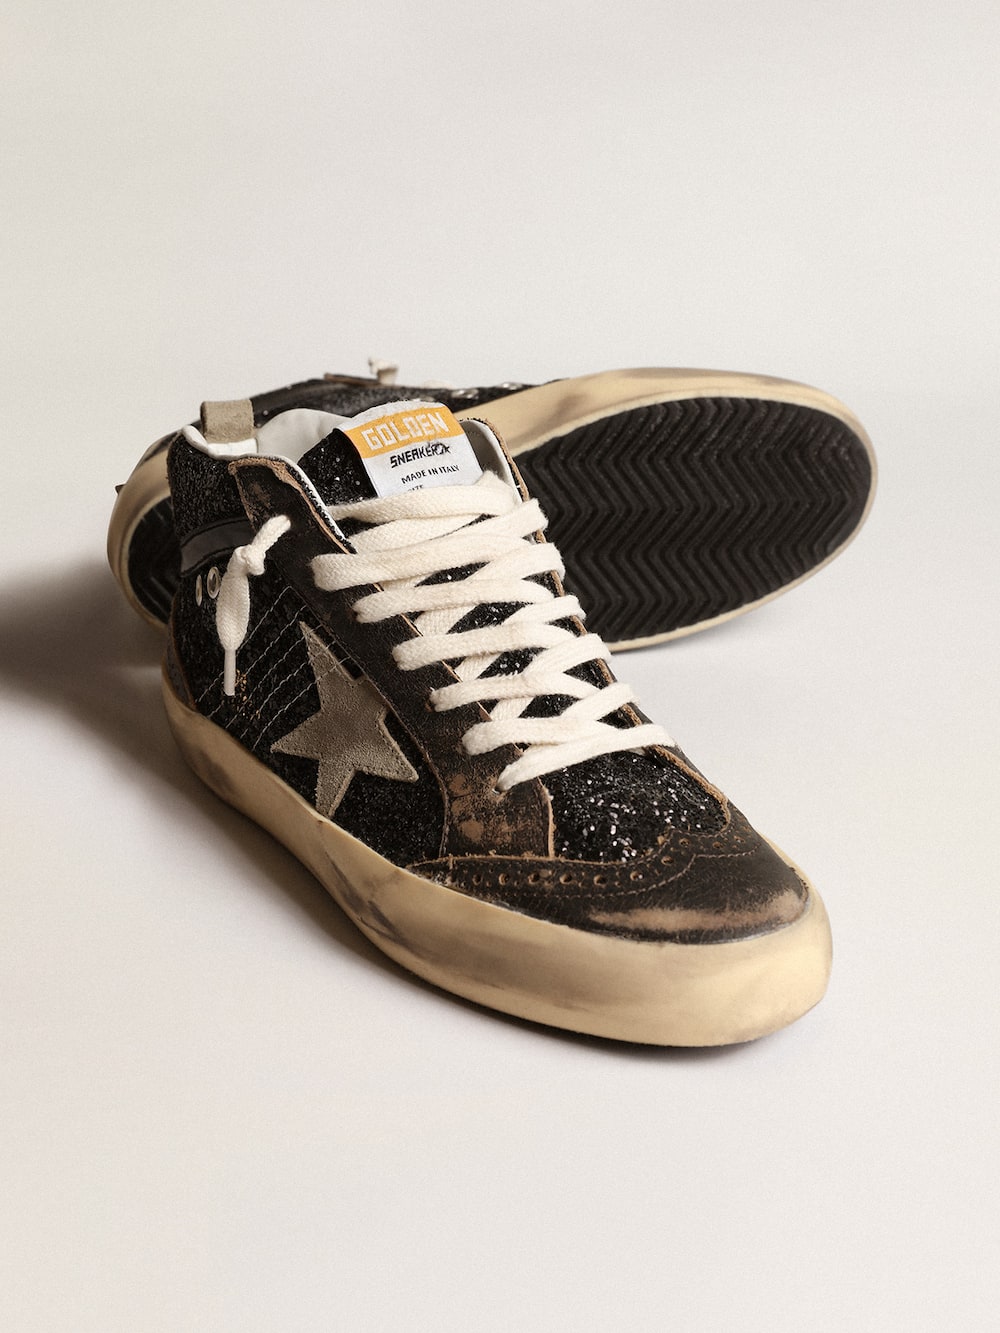 Golden Goose - Women's Mid Star in black glitter with dove-gray suede star and heel tab in 